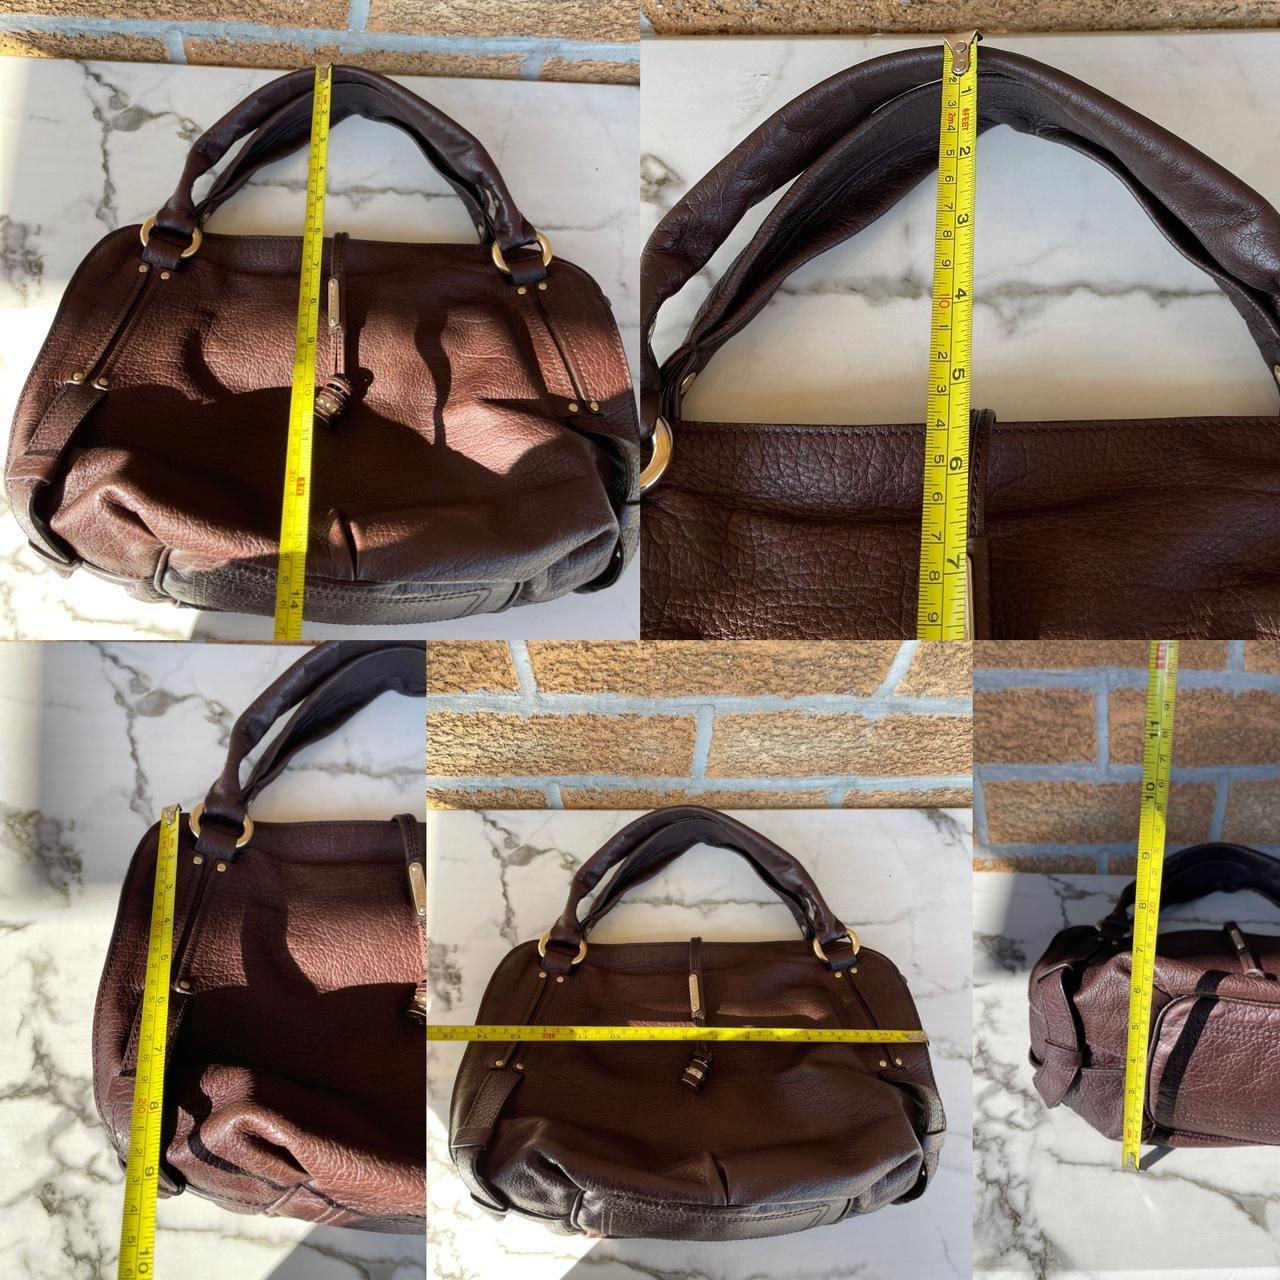 Product Image 4 - Céline
Leather Bittersweet Hobo Bag

In good